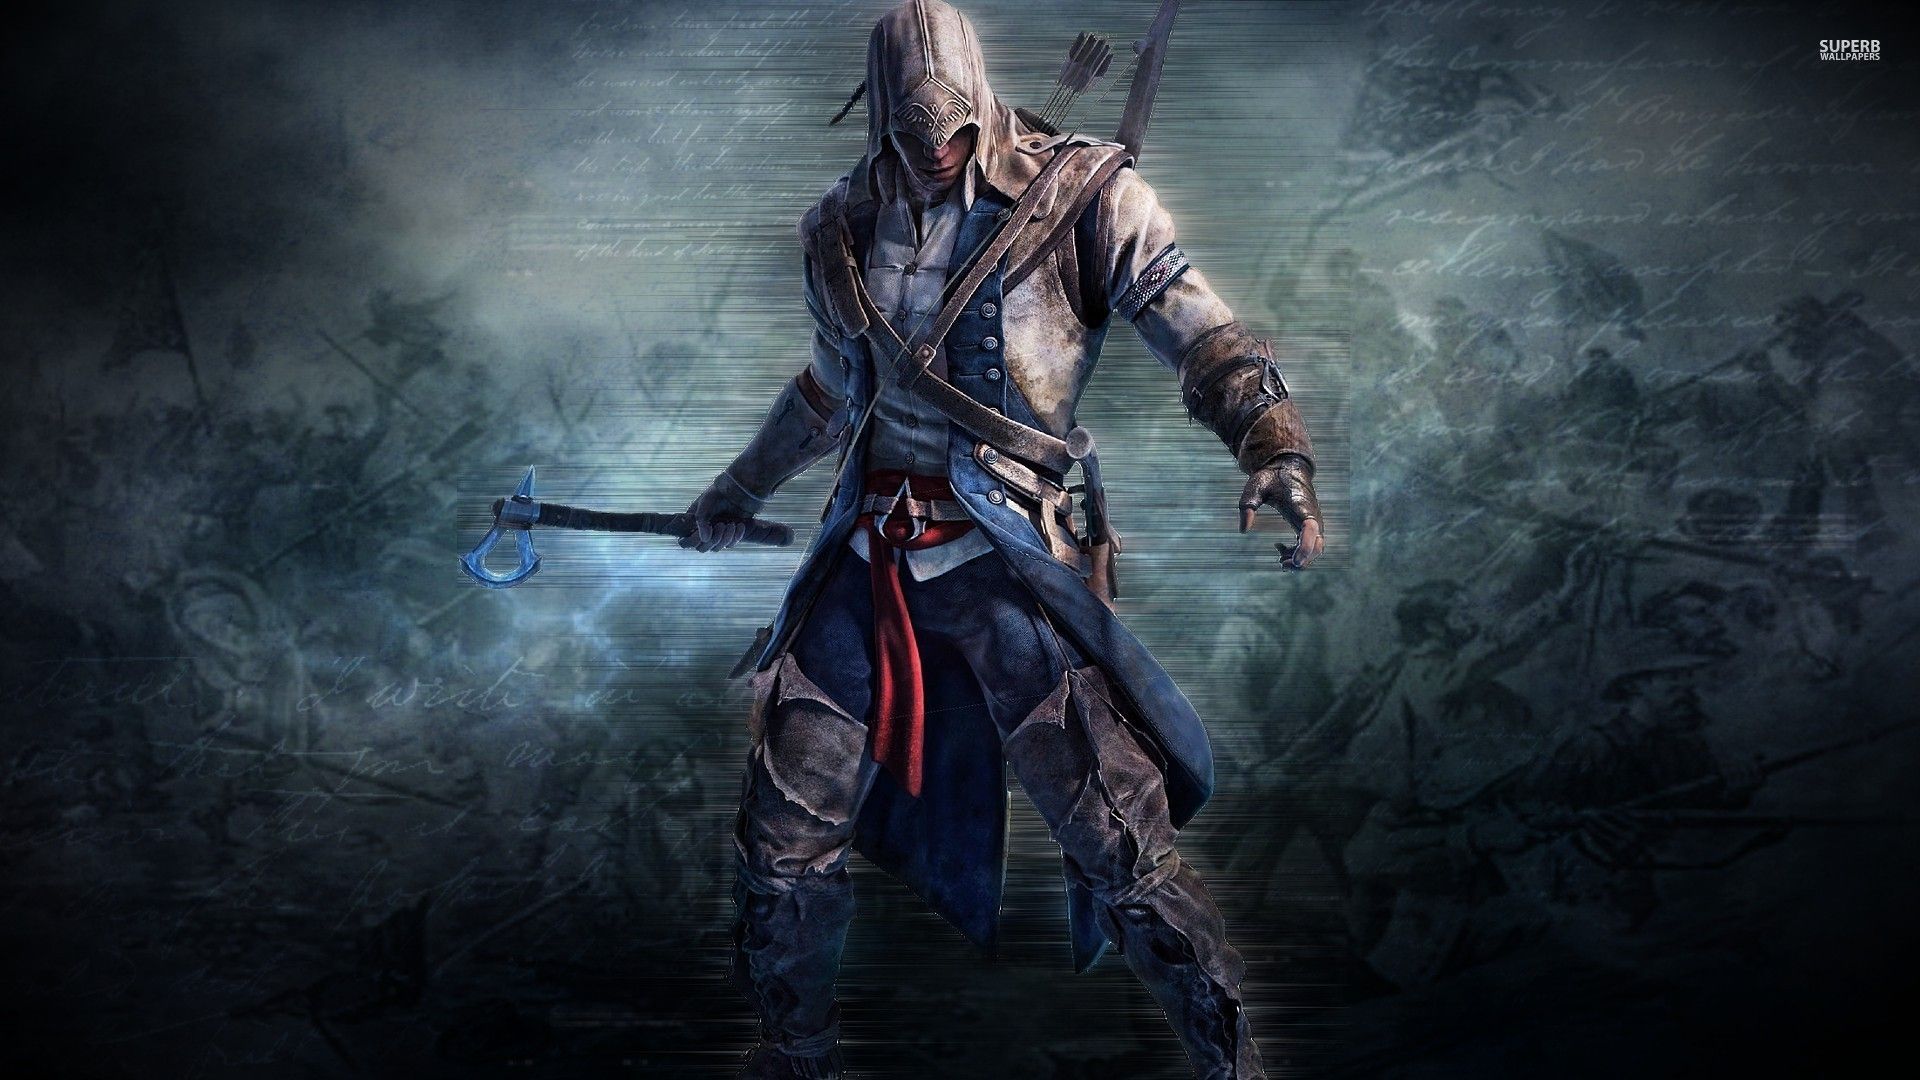 connor-kenway-with-an-ax-assassins-creed-iii-49880-1920x1080.jpg